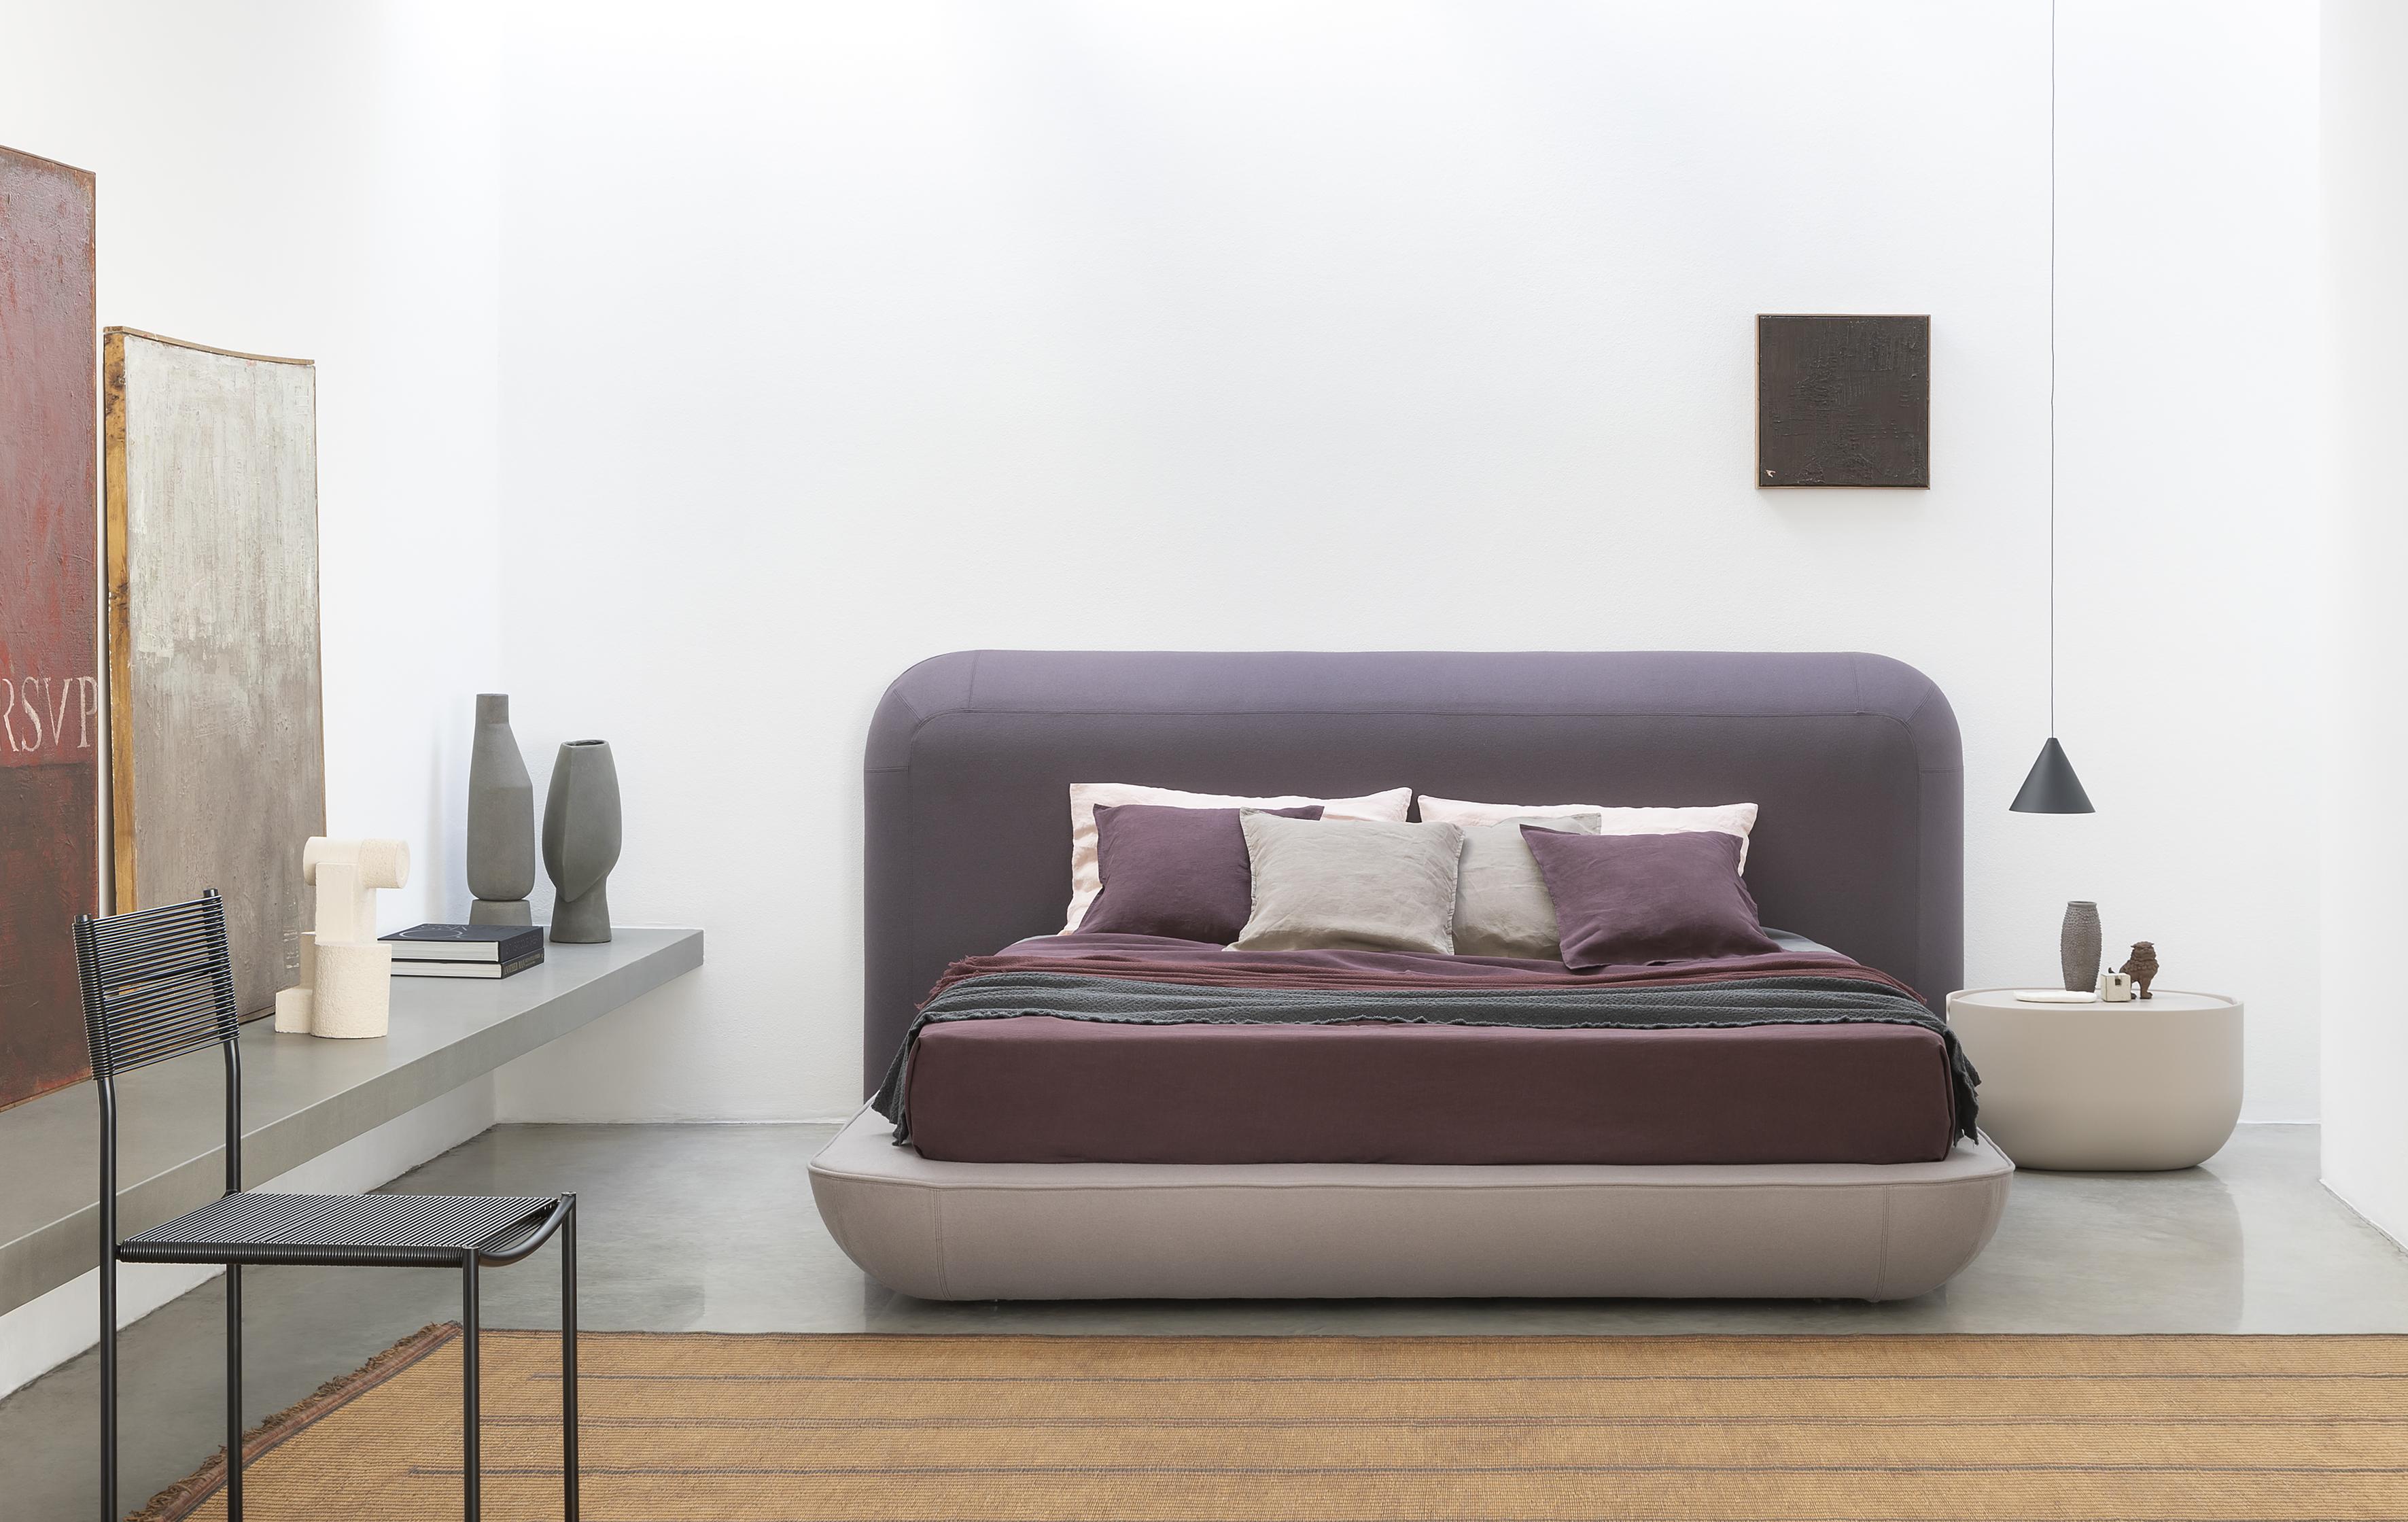 Alias 28A Medium Okome Bed with Headboard Upholstered in White by Nendo

Bed with upholstered headbord and structure. Removable cover in eco leather Serge Ferrari®, Alias®, Camira® or Kvadrat® fabric or Pelle Frau® leather. Wooden staves. Mattress